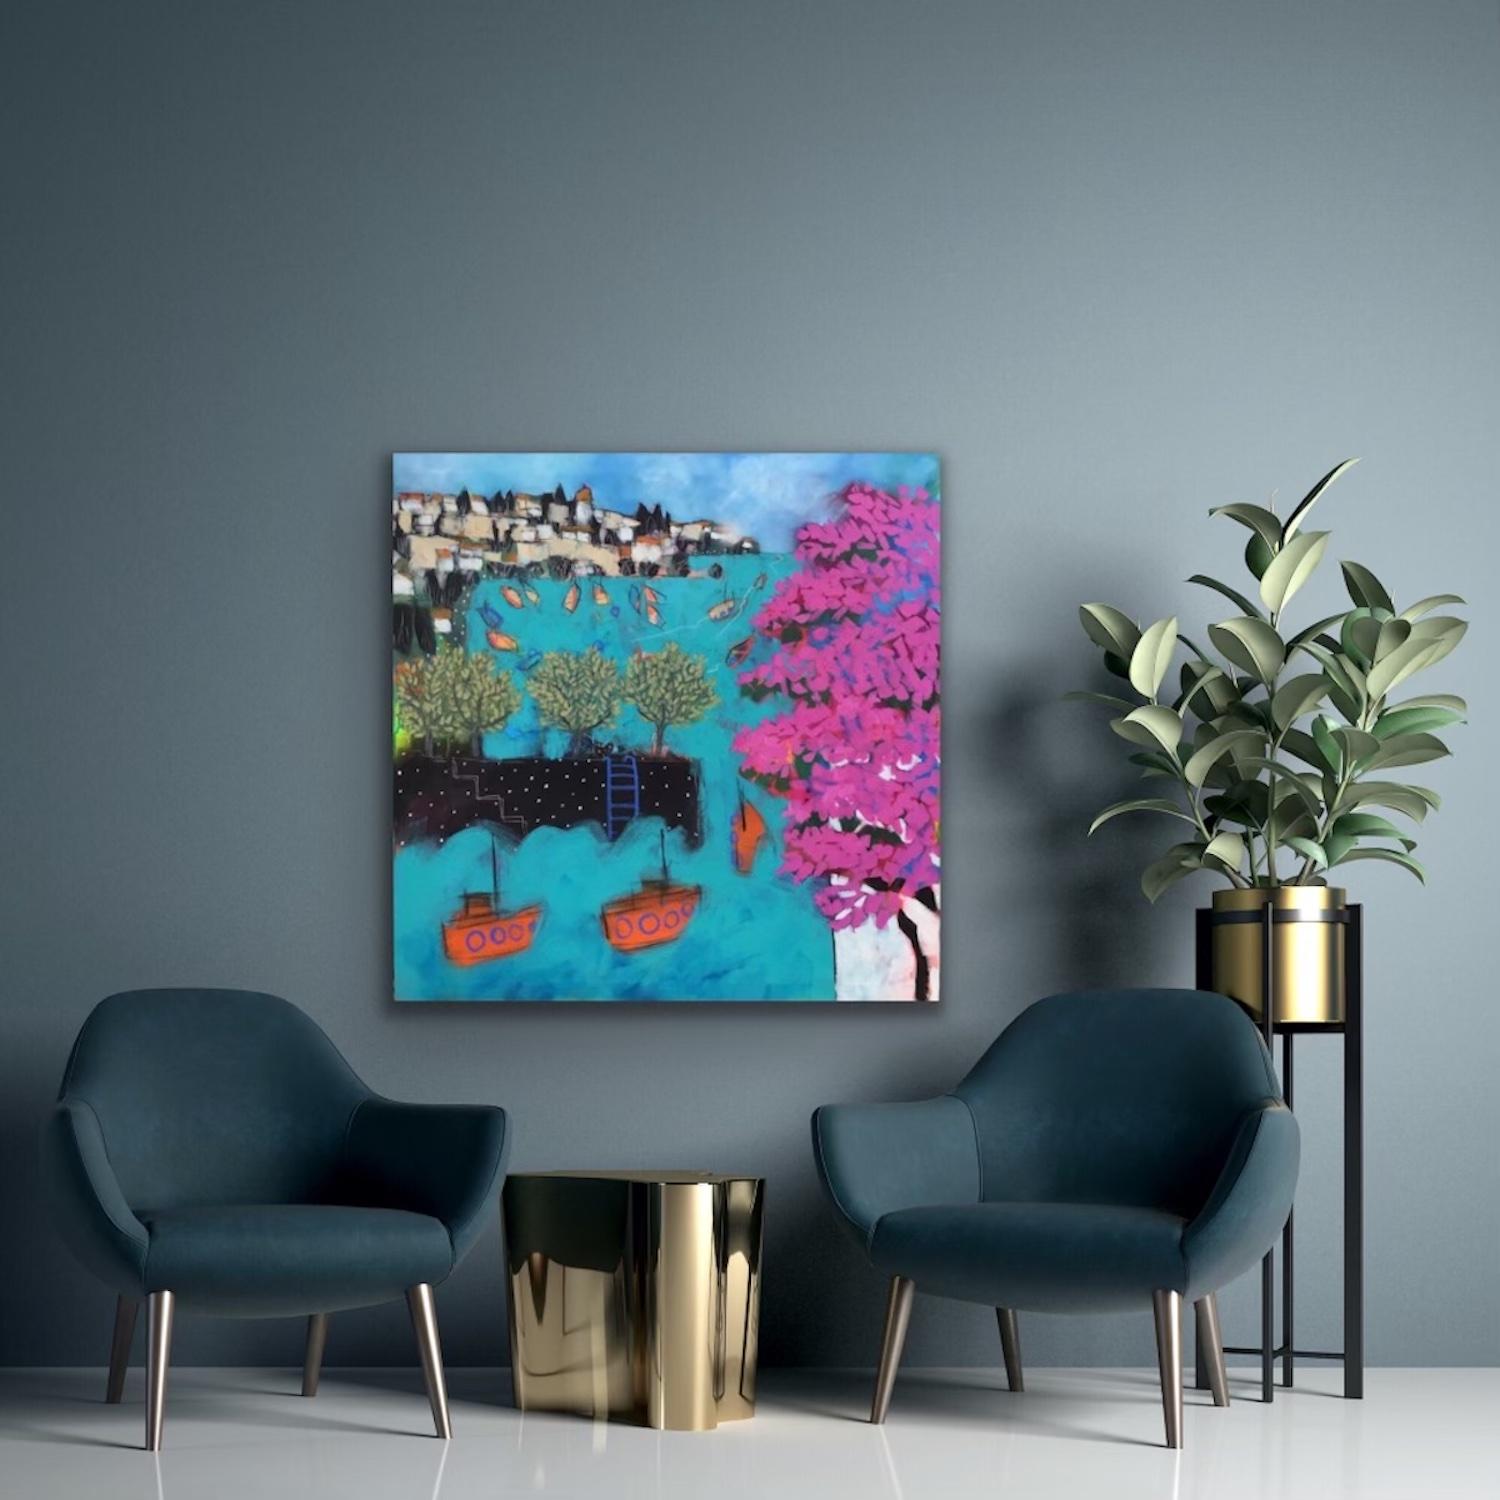 Greek Harbour by Relton and Marine [2022]
original and hang signed by the artist 

Acrylic paint on canvas

Image size: H:107 cm x W:107 cm

Complete Size of Unframed Work: H:107 cm x W:107 cm x D:4.5cm

Sold Unframed

Please note that insitu images